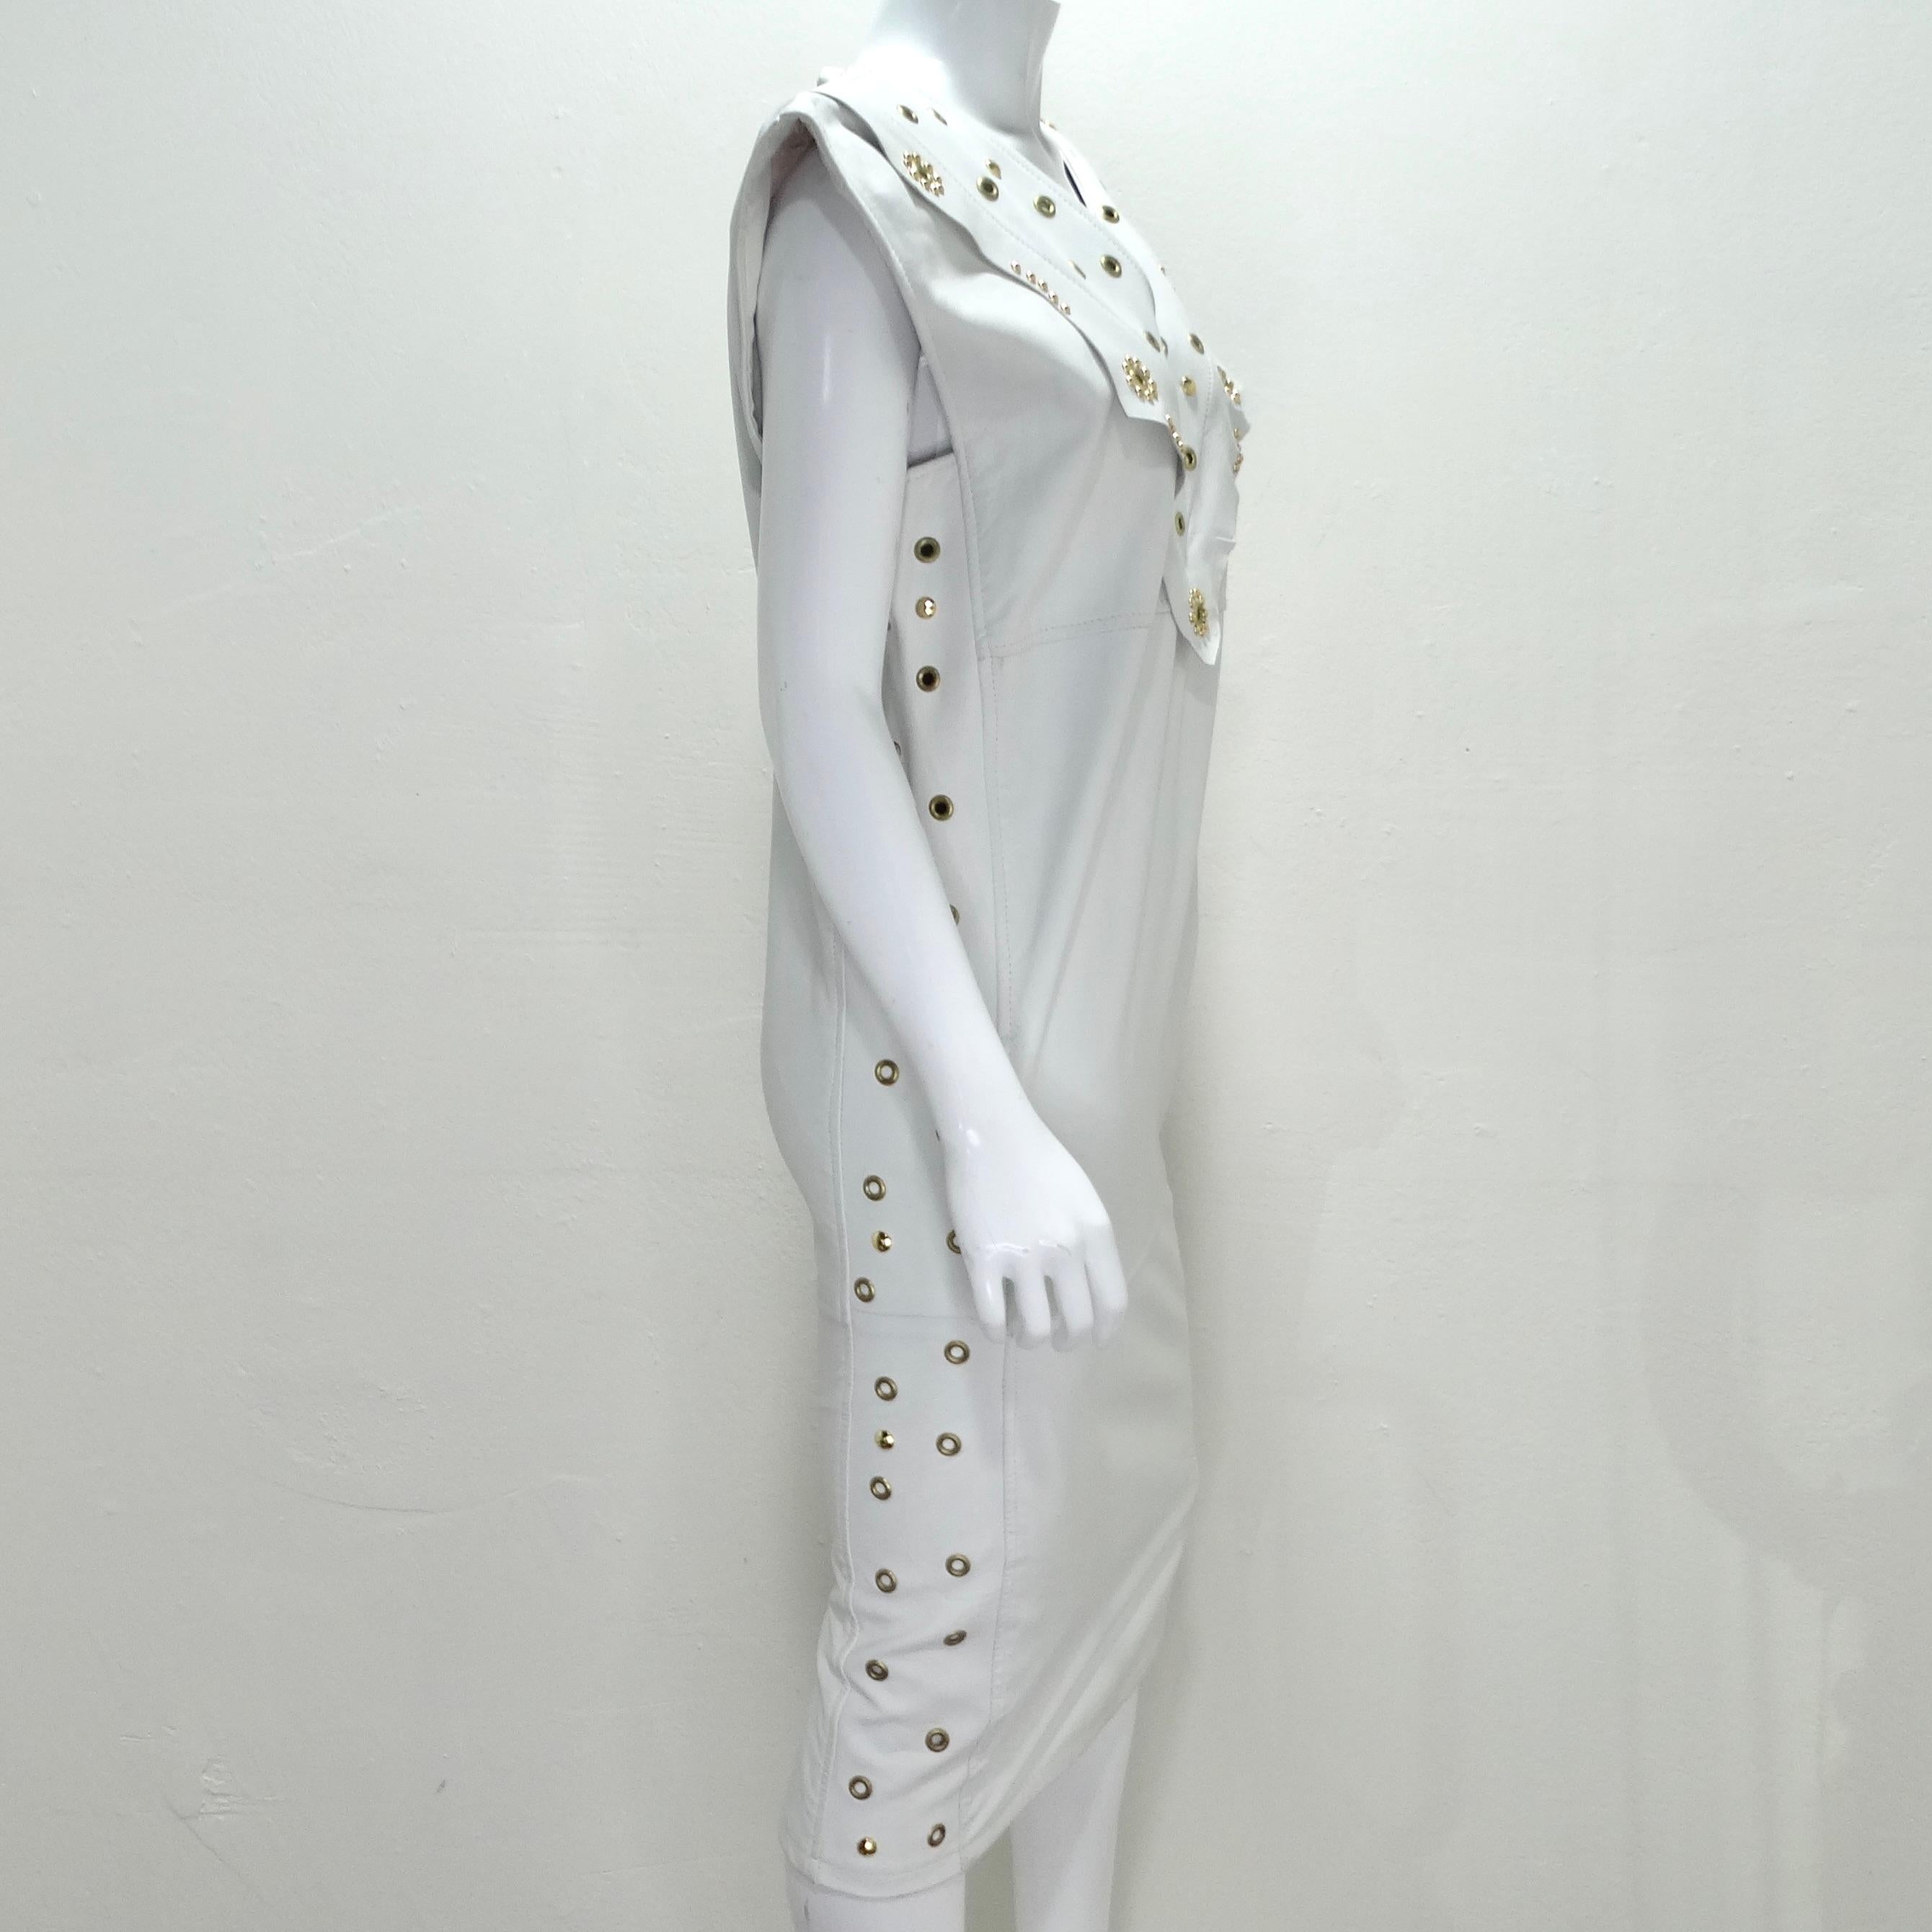 Jacques Lelong 1980s White Leather Studded Dress In Excellent Condition For Sale In Scottsdale, AZ